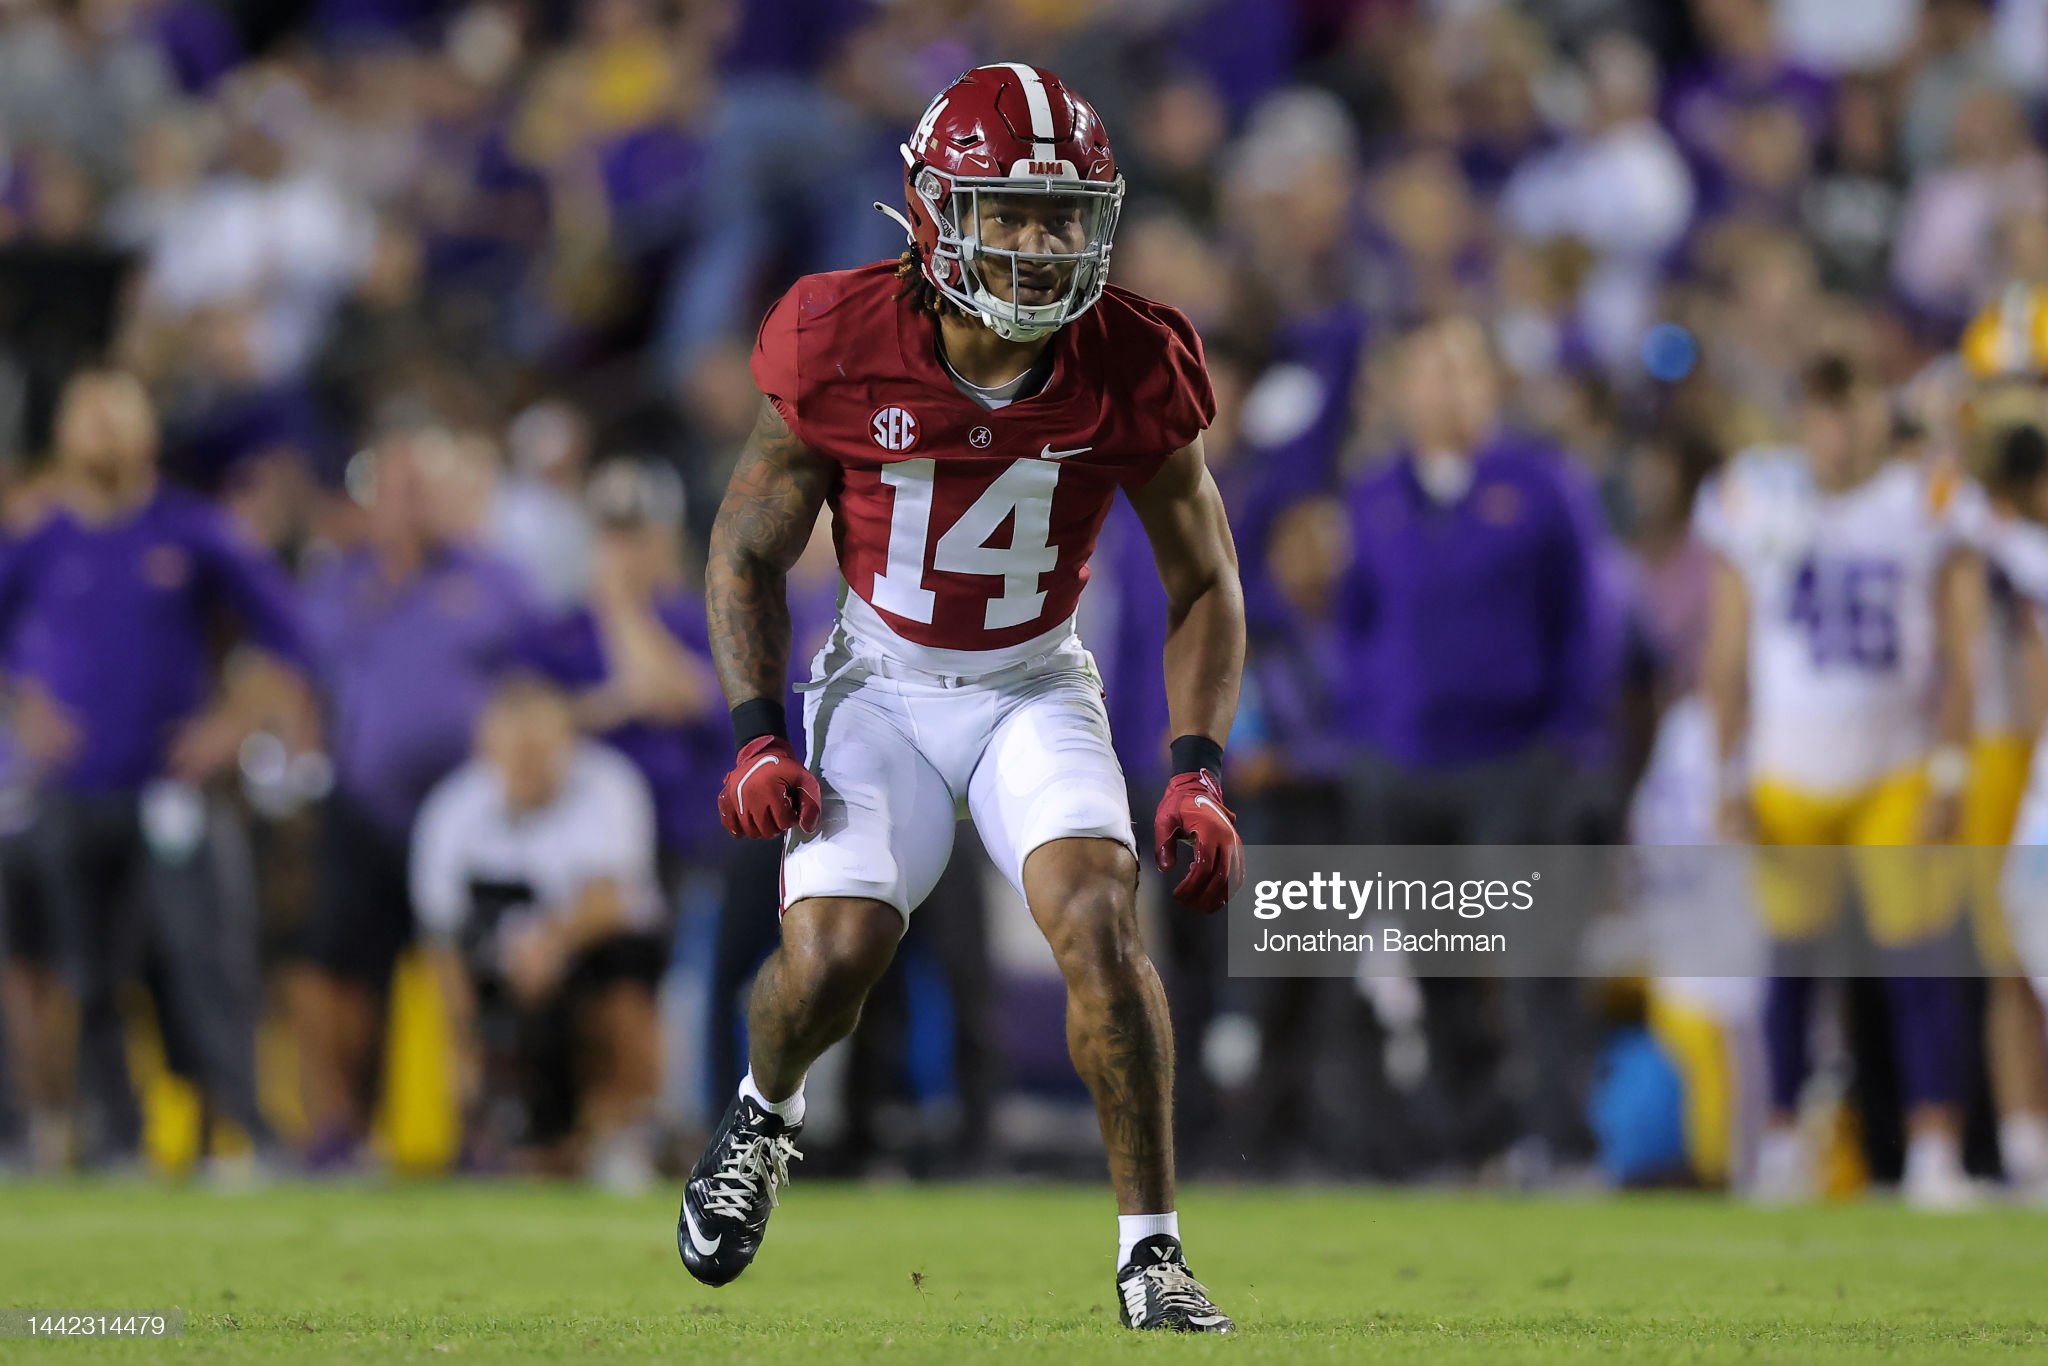 2023 NFL Draft Scouting Report: S Brian Branch, Alabama